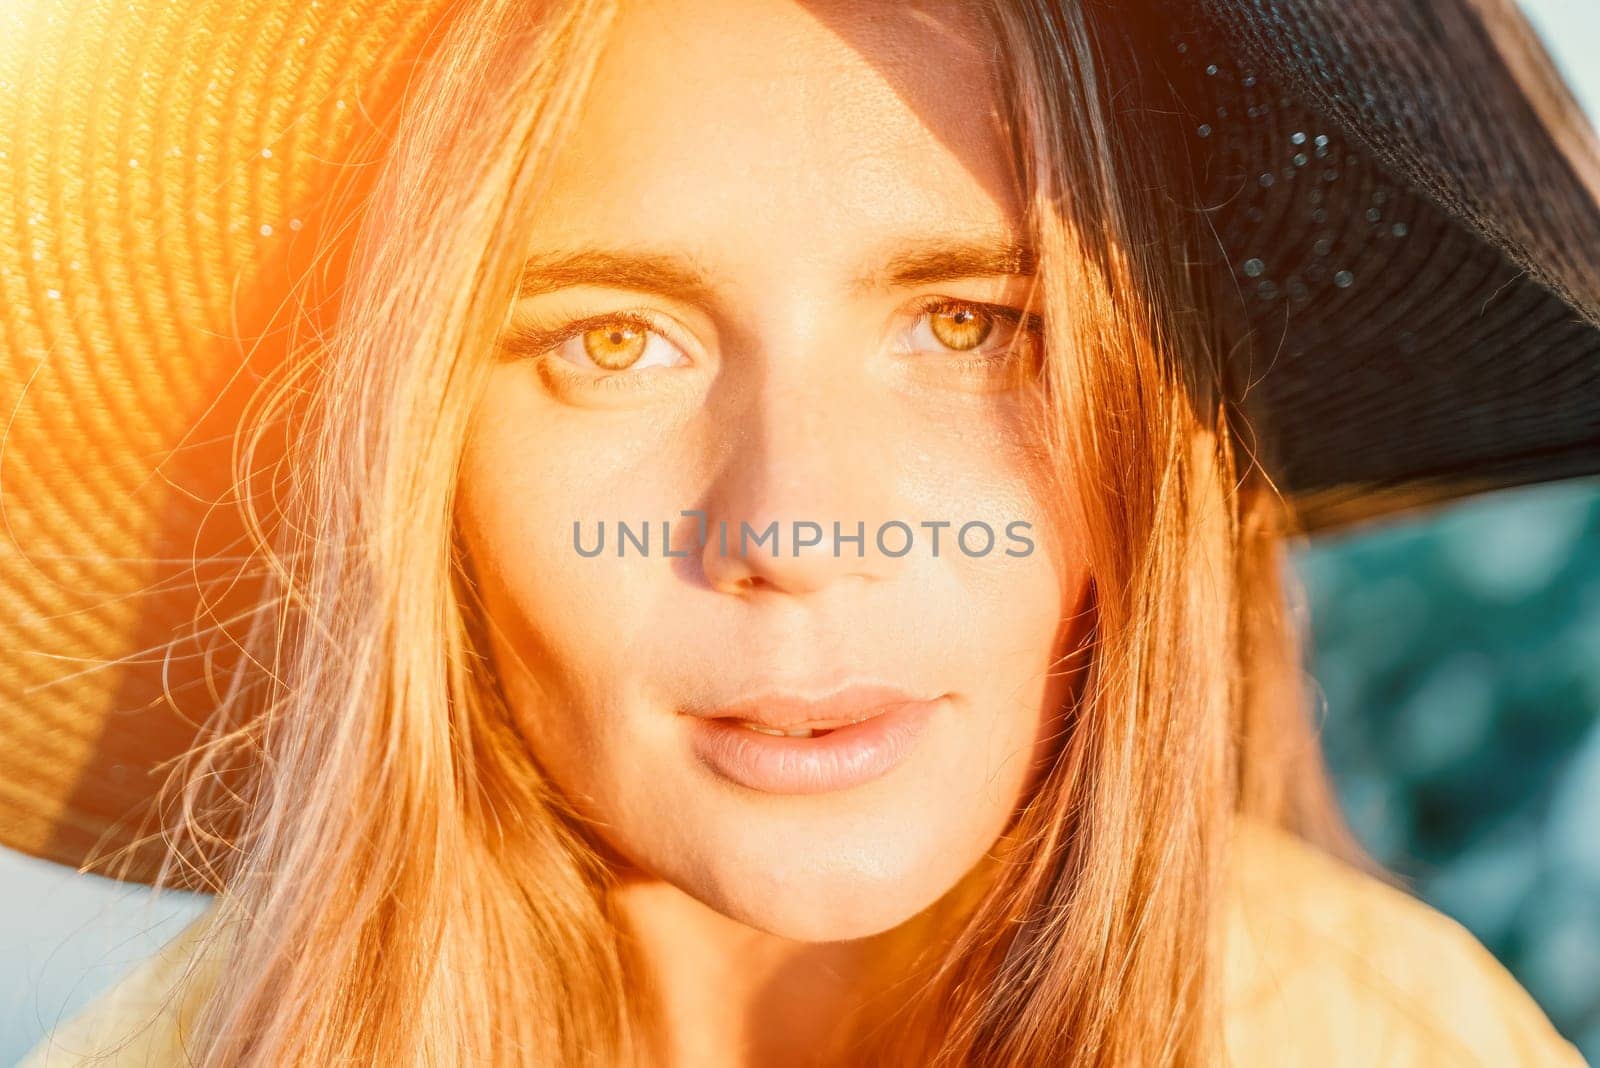 Portrait of happy young woman wearing summer black hat with large brim at beach on sunset. Closeup face of attractive girl with black straw hat. Happy young woman smiling and looking at camera at sea